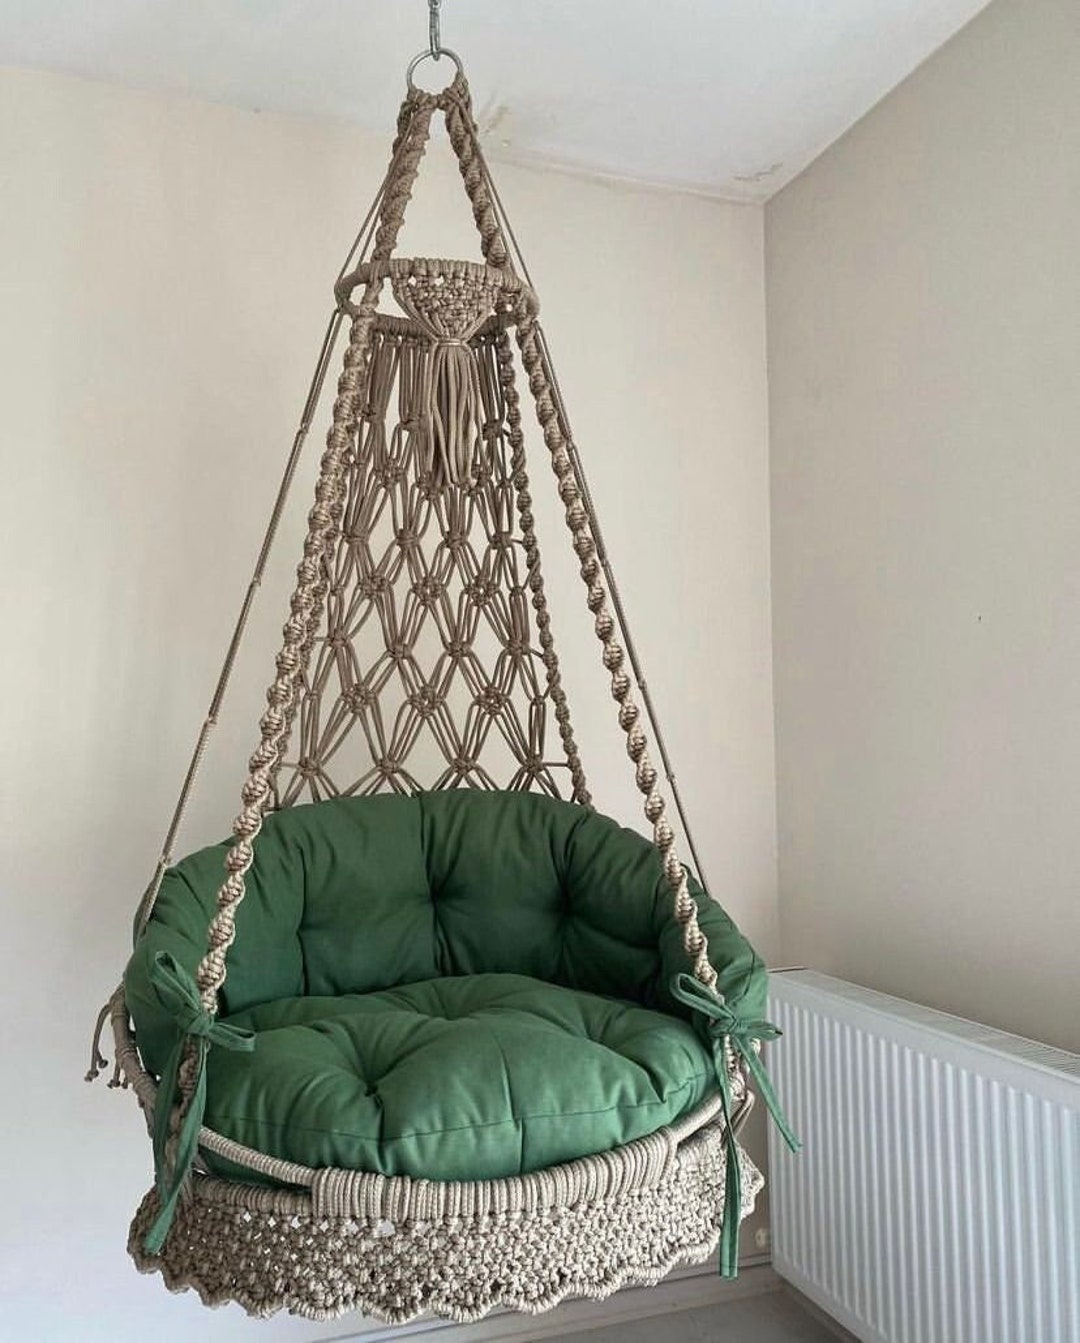 Macrame Wall Hanging Swing Hanging Adult and Child Chair